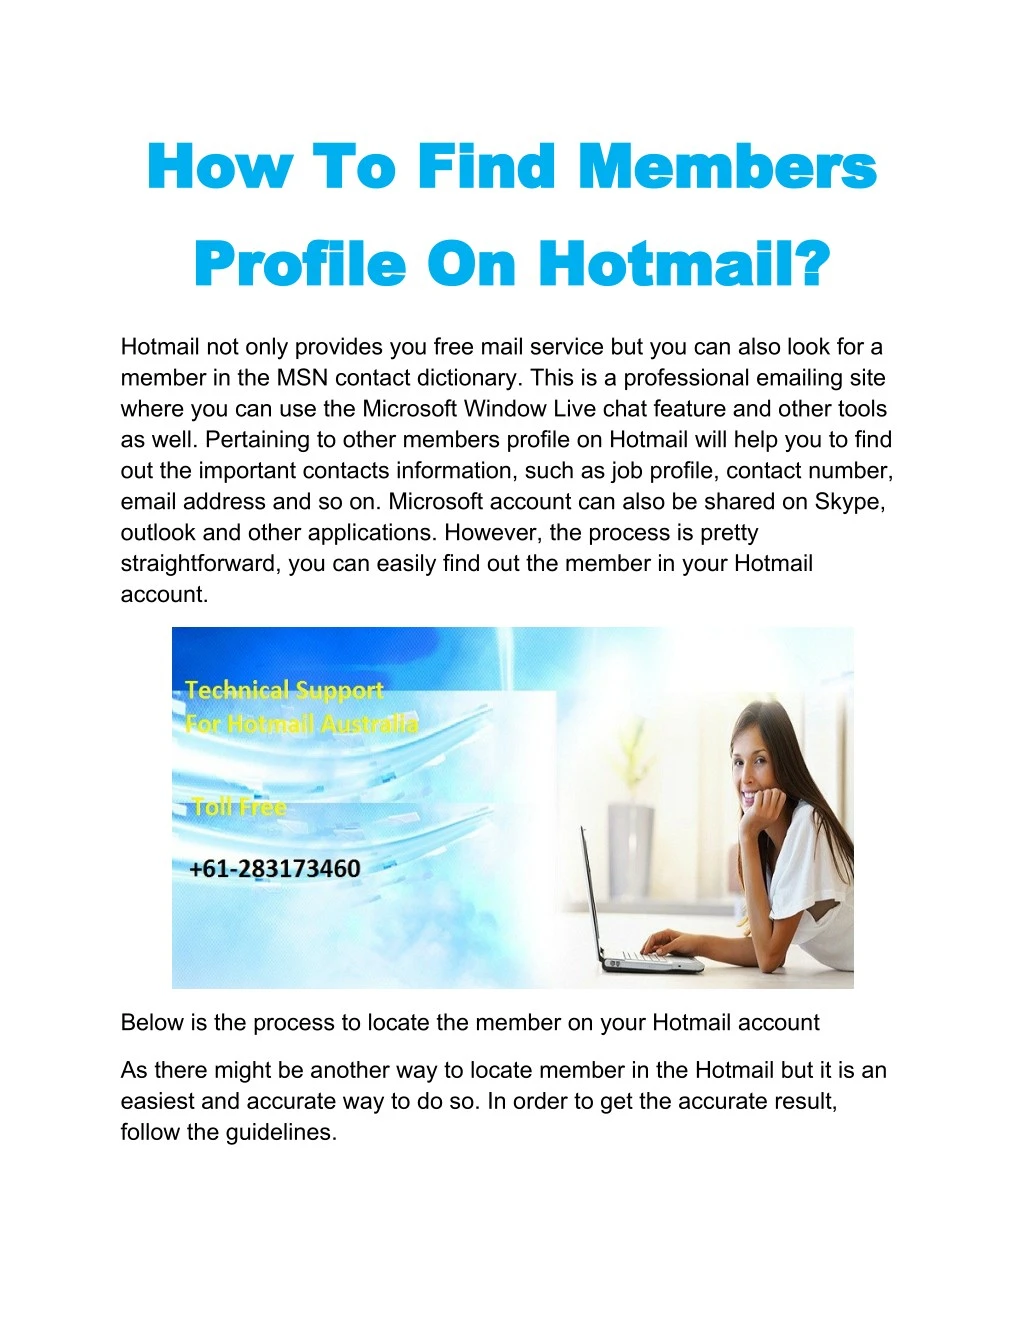 how to find members how to find members profile